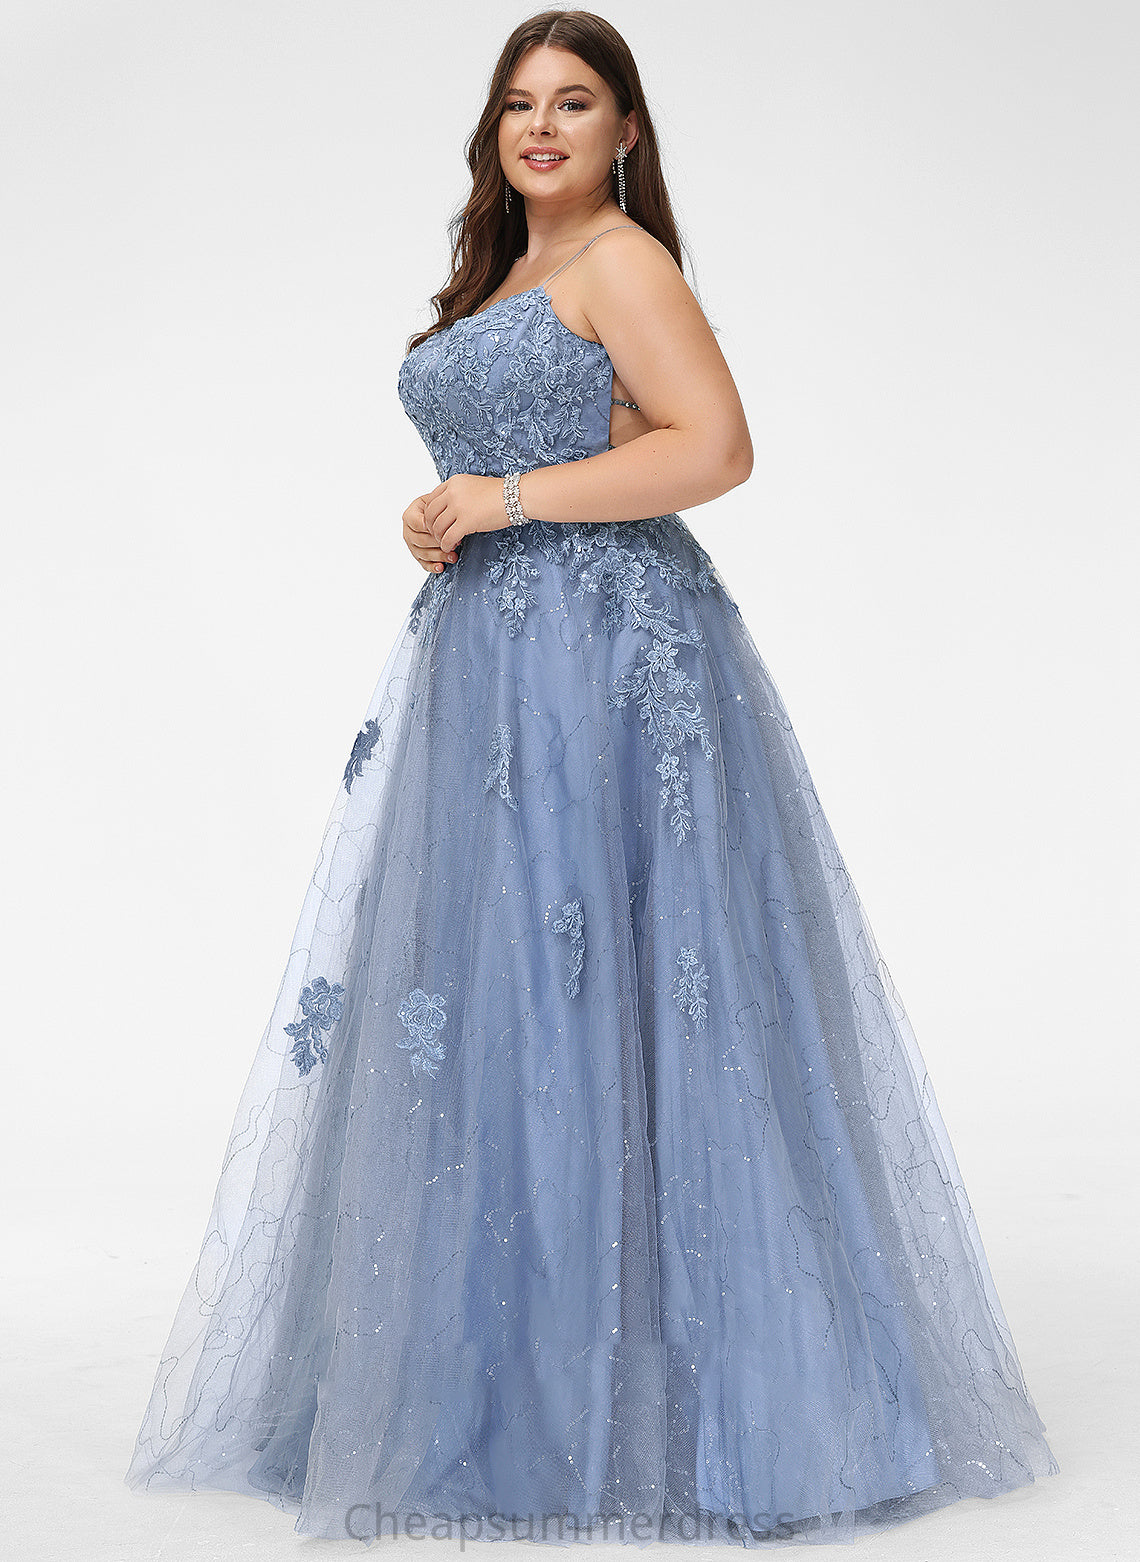 Split Neckline Floor-Length Front Jaslyn With Square Ball-Gown/Princess Prom Dresses Sequins Tulle